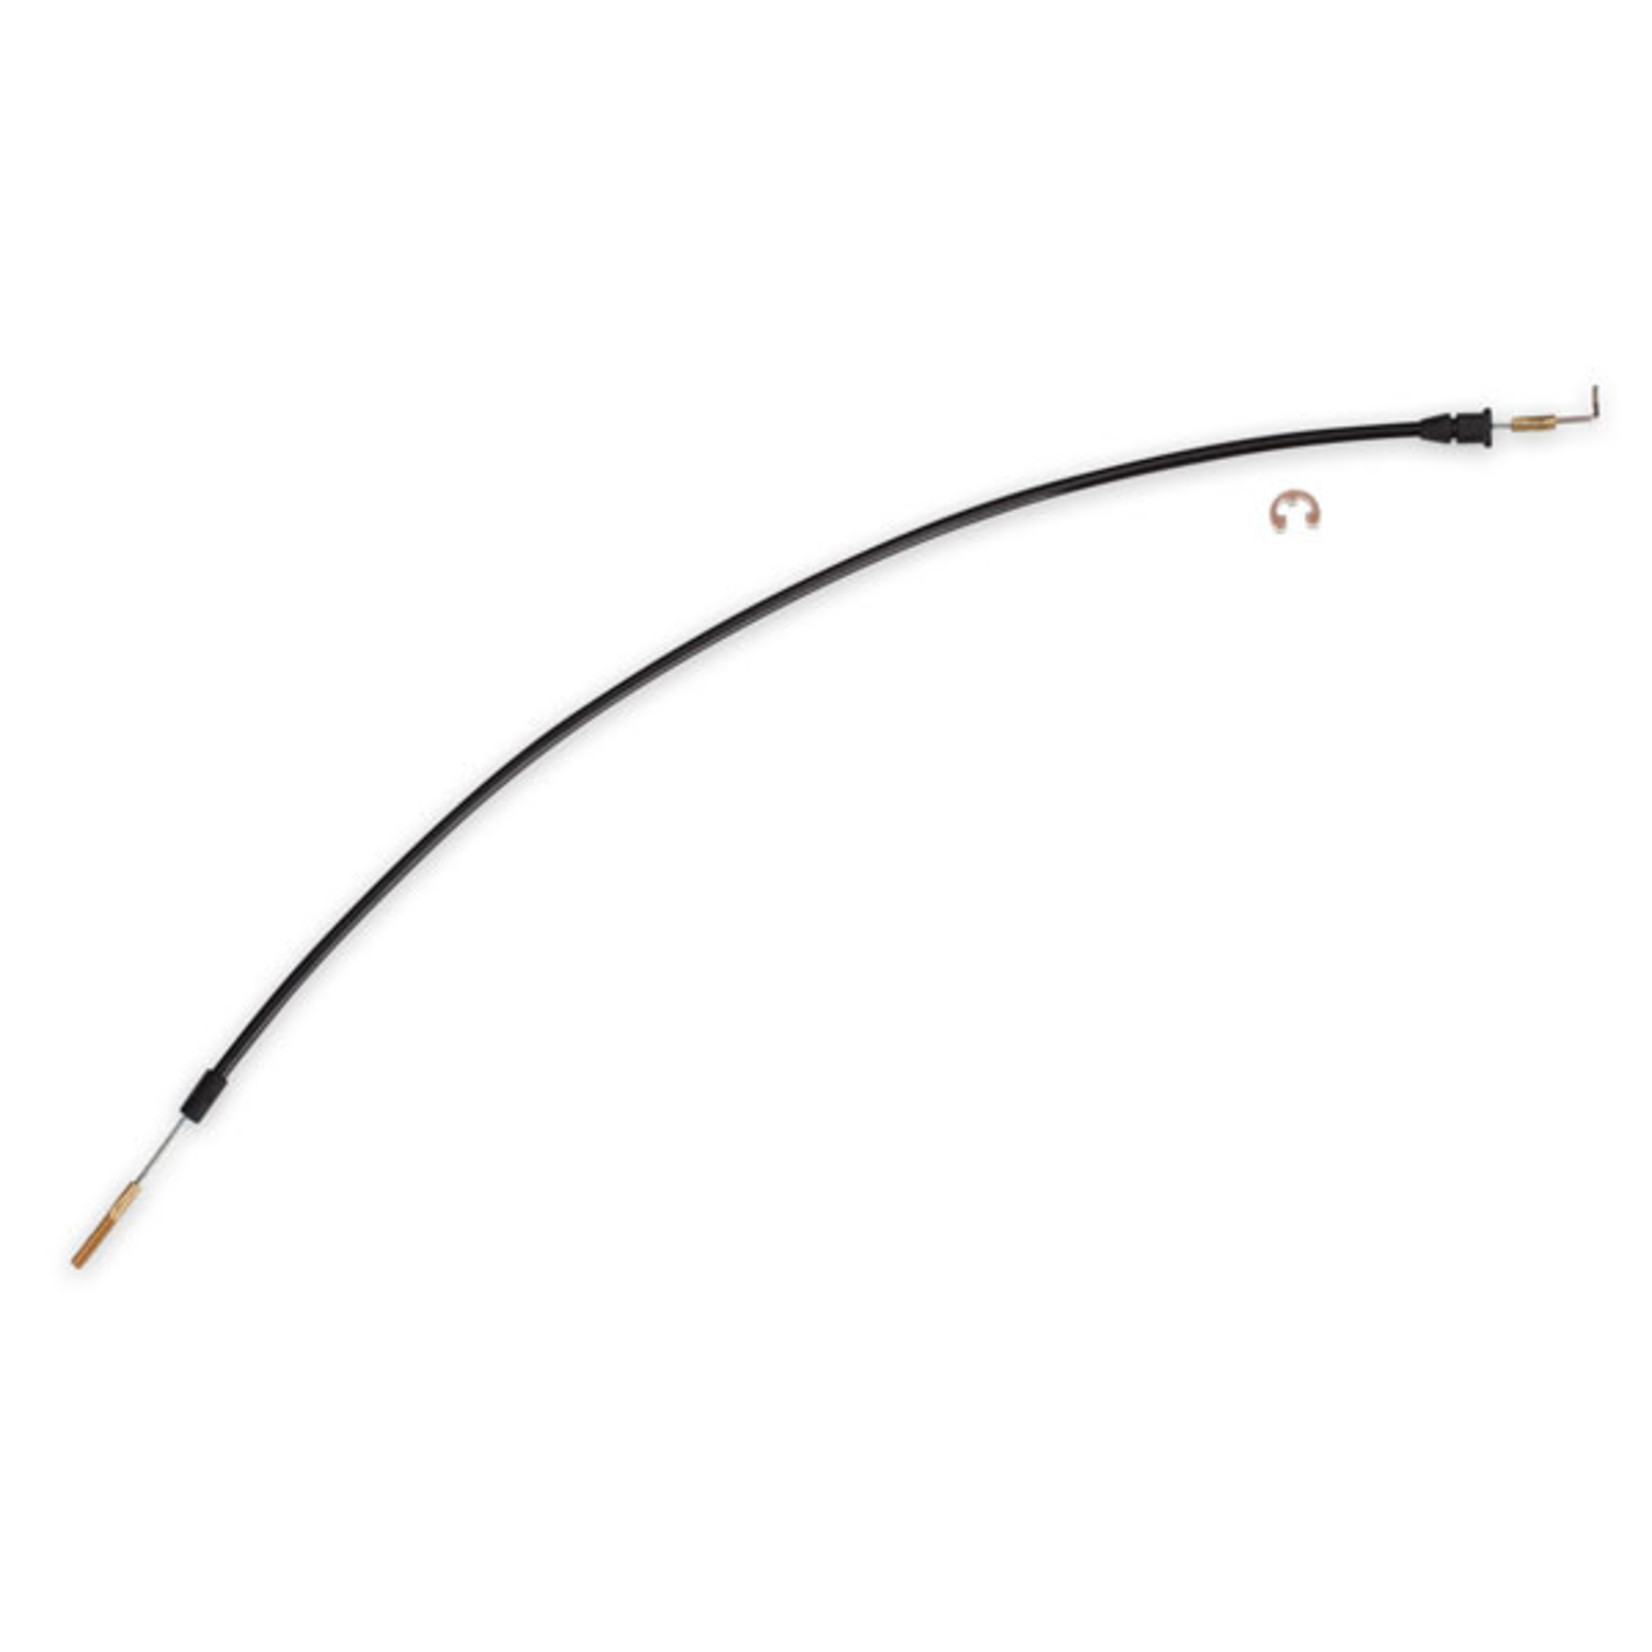 Traxxas 8148 - Cable, T-lock, extra long (193mm) (for use with